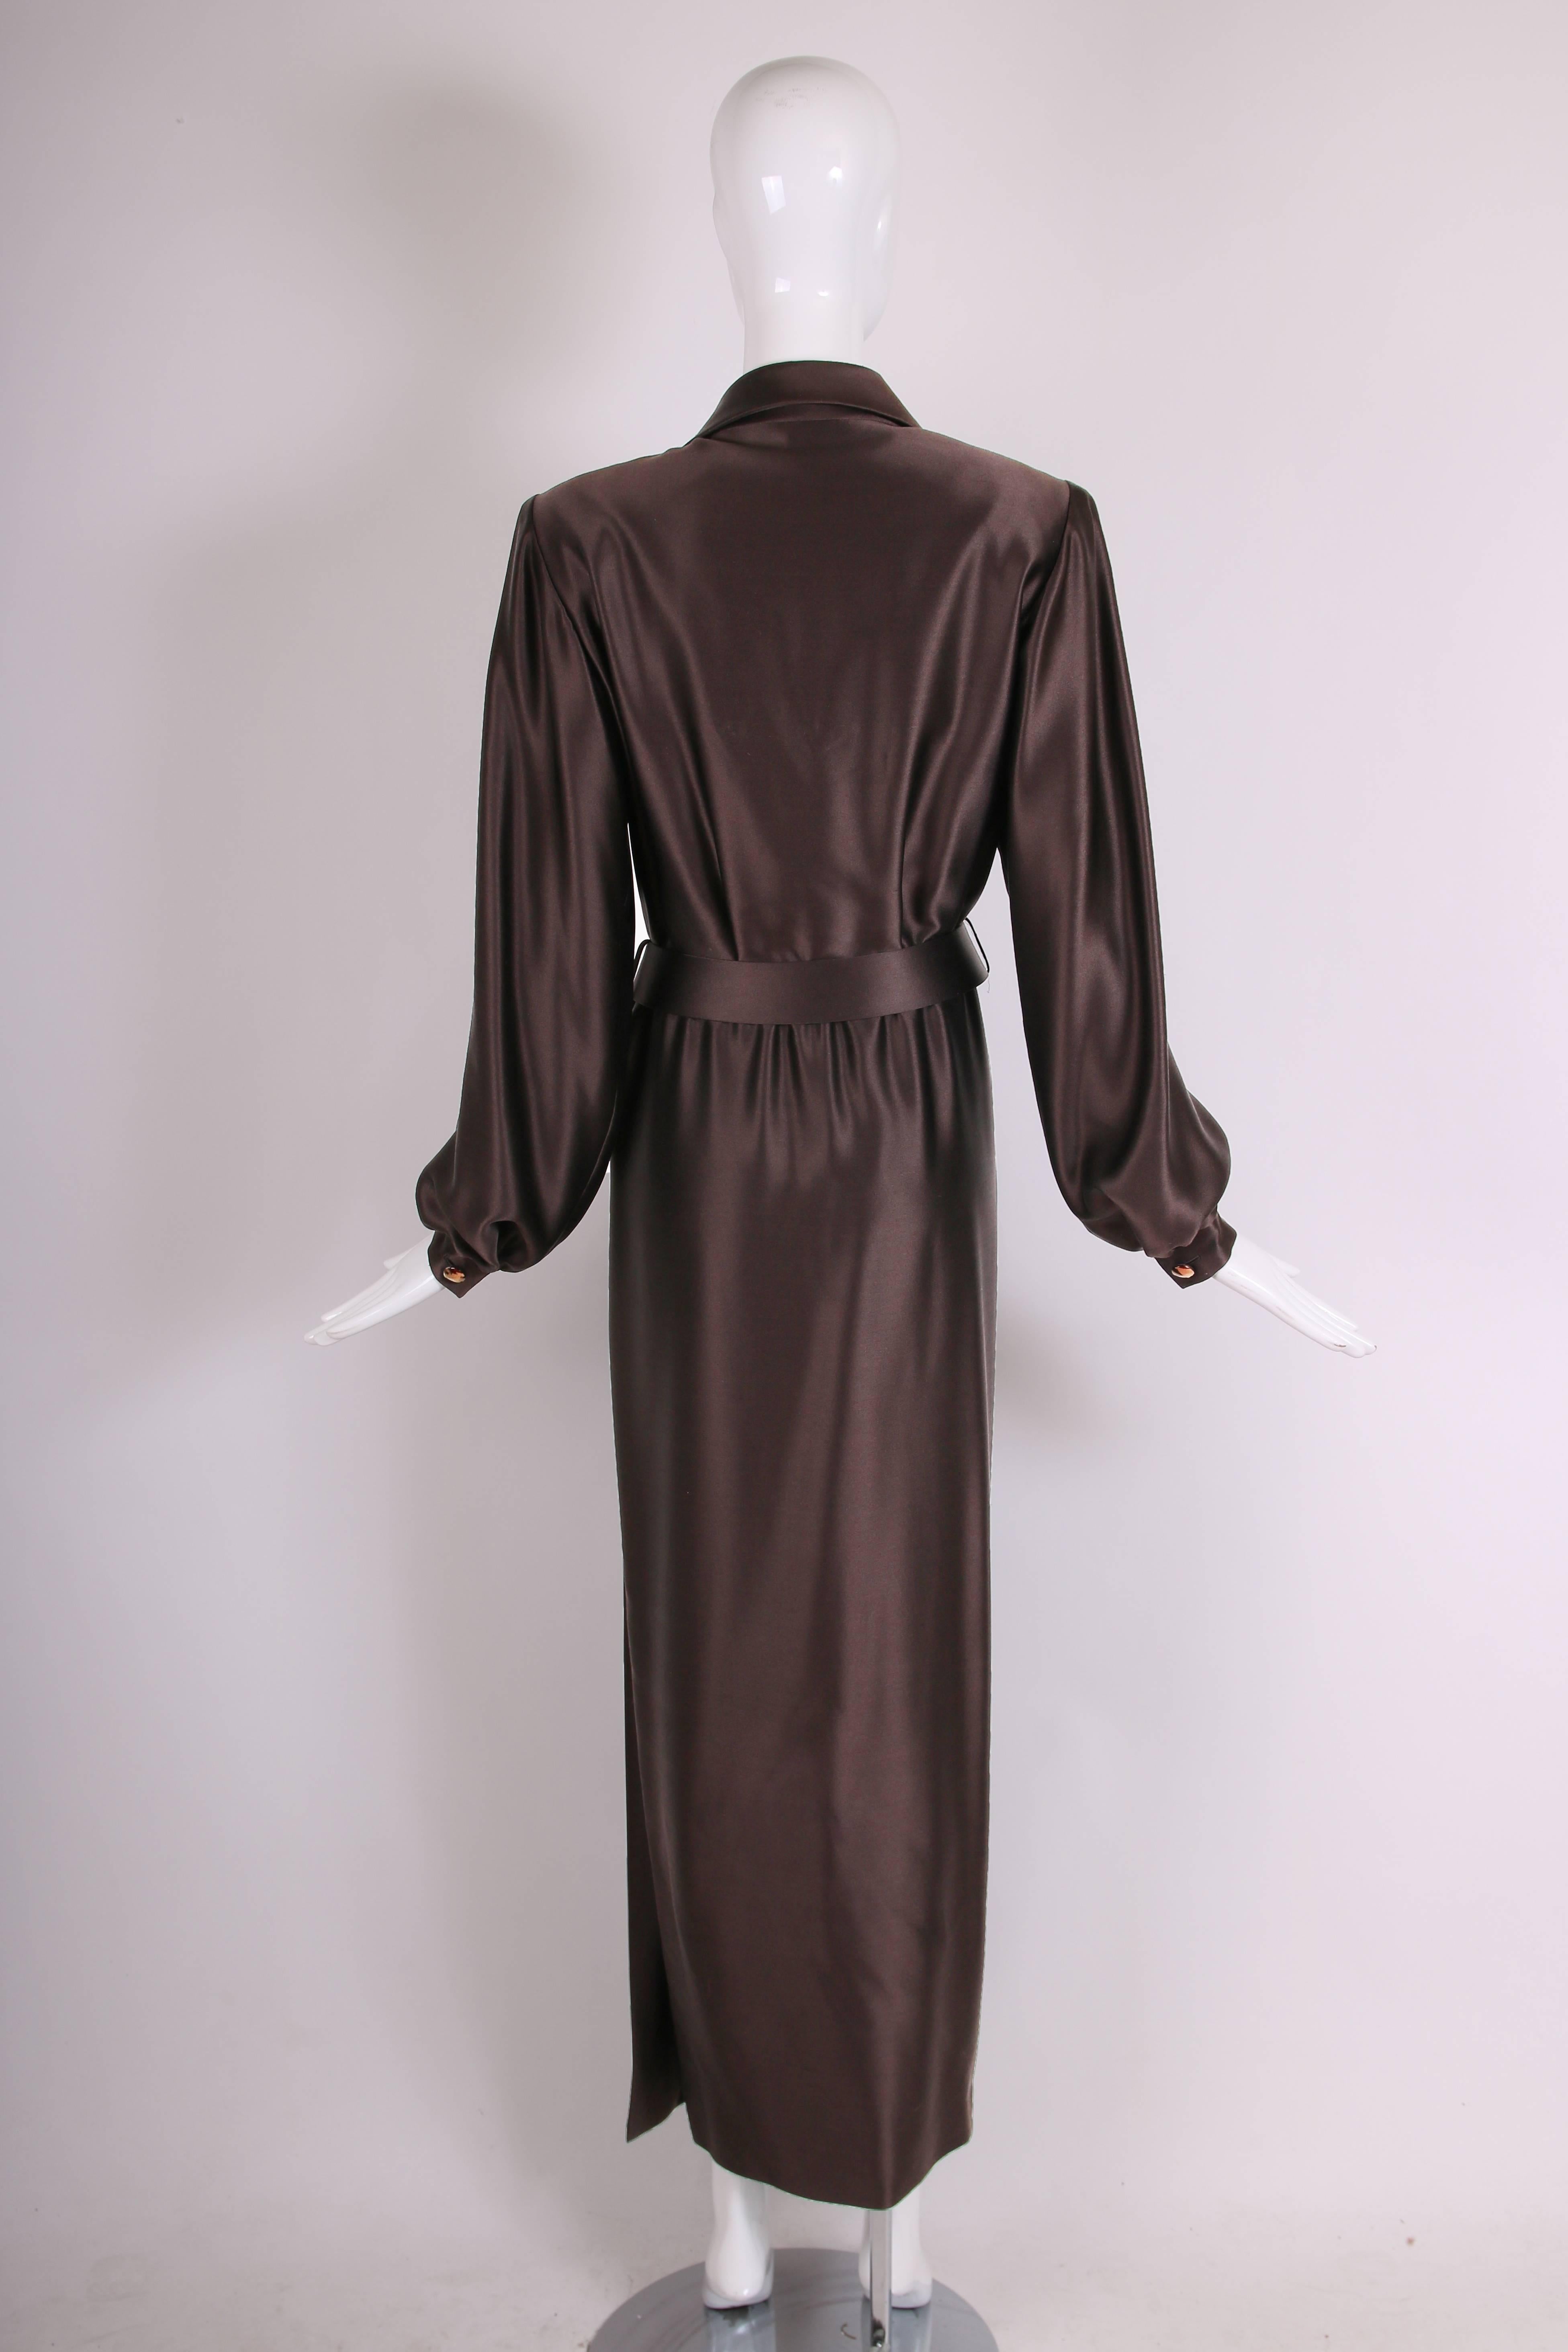 Women's Yves Saint Laurent YSL Haute Couture Brown Silk Gown with Matching Belt, 1989 